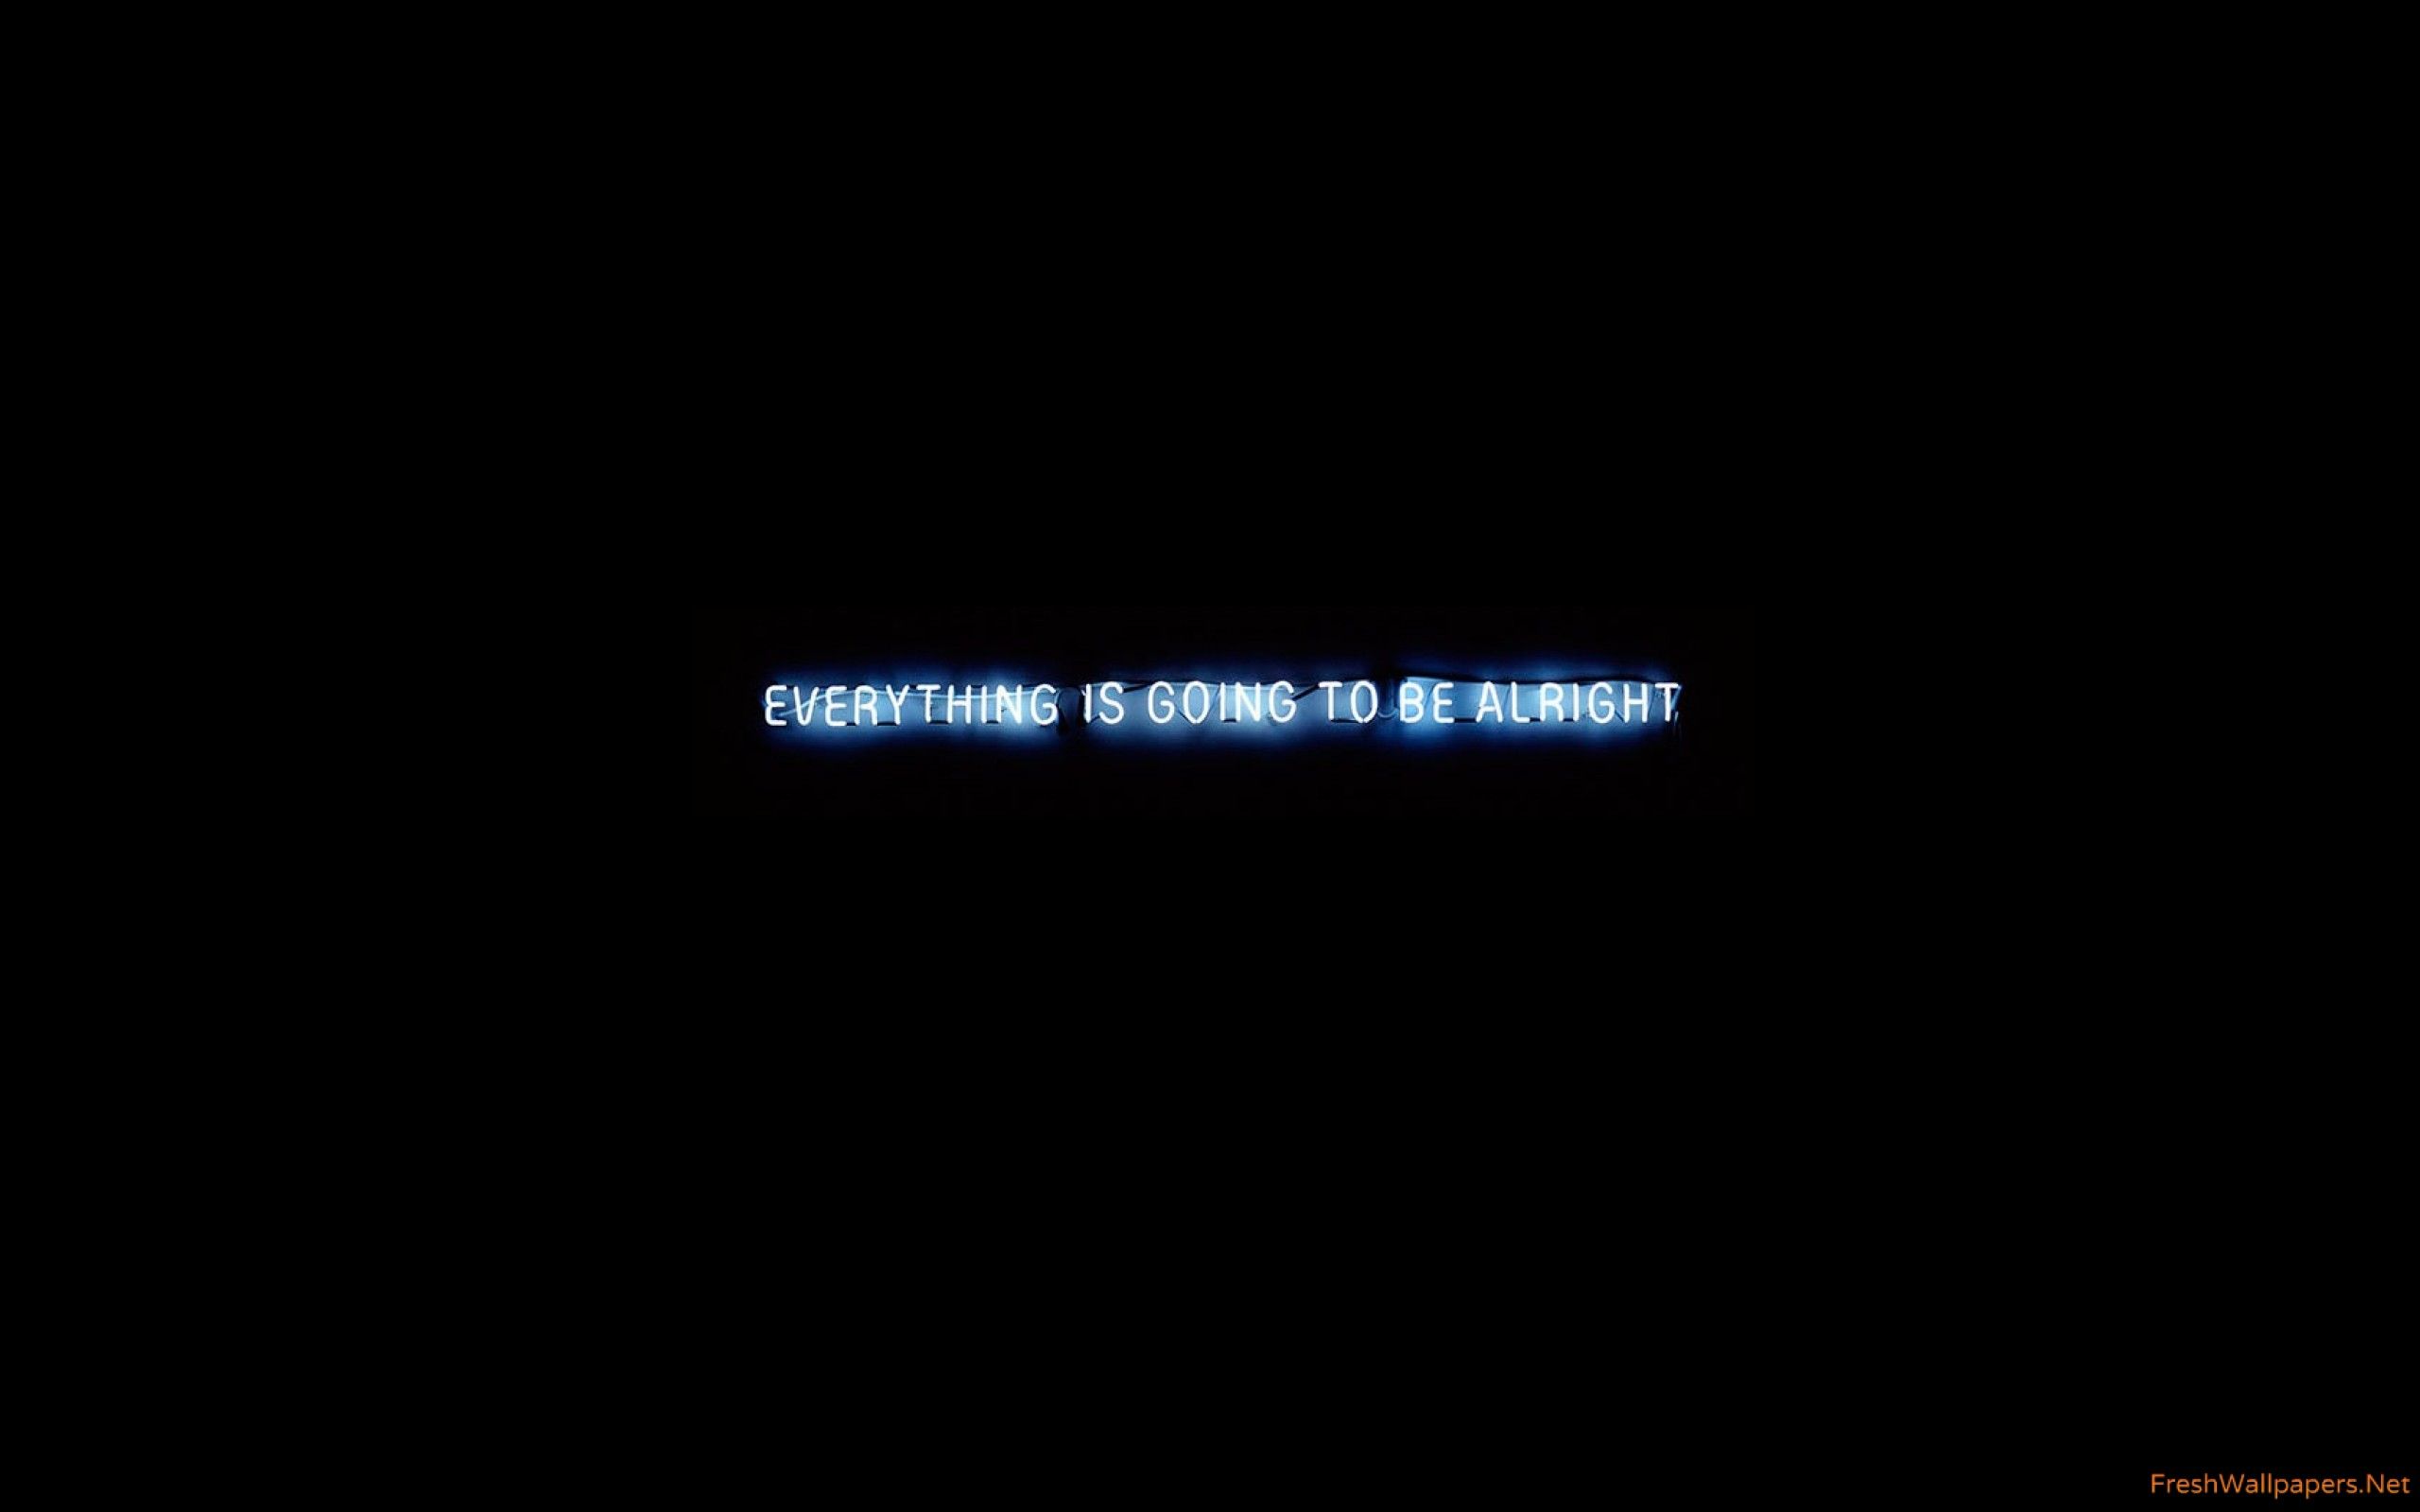 Everything going alright wallpaper